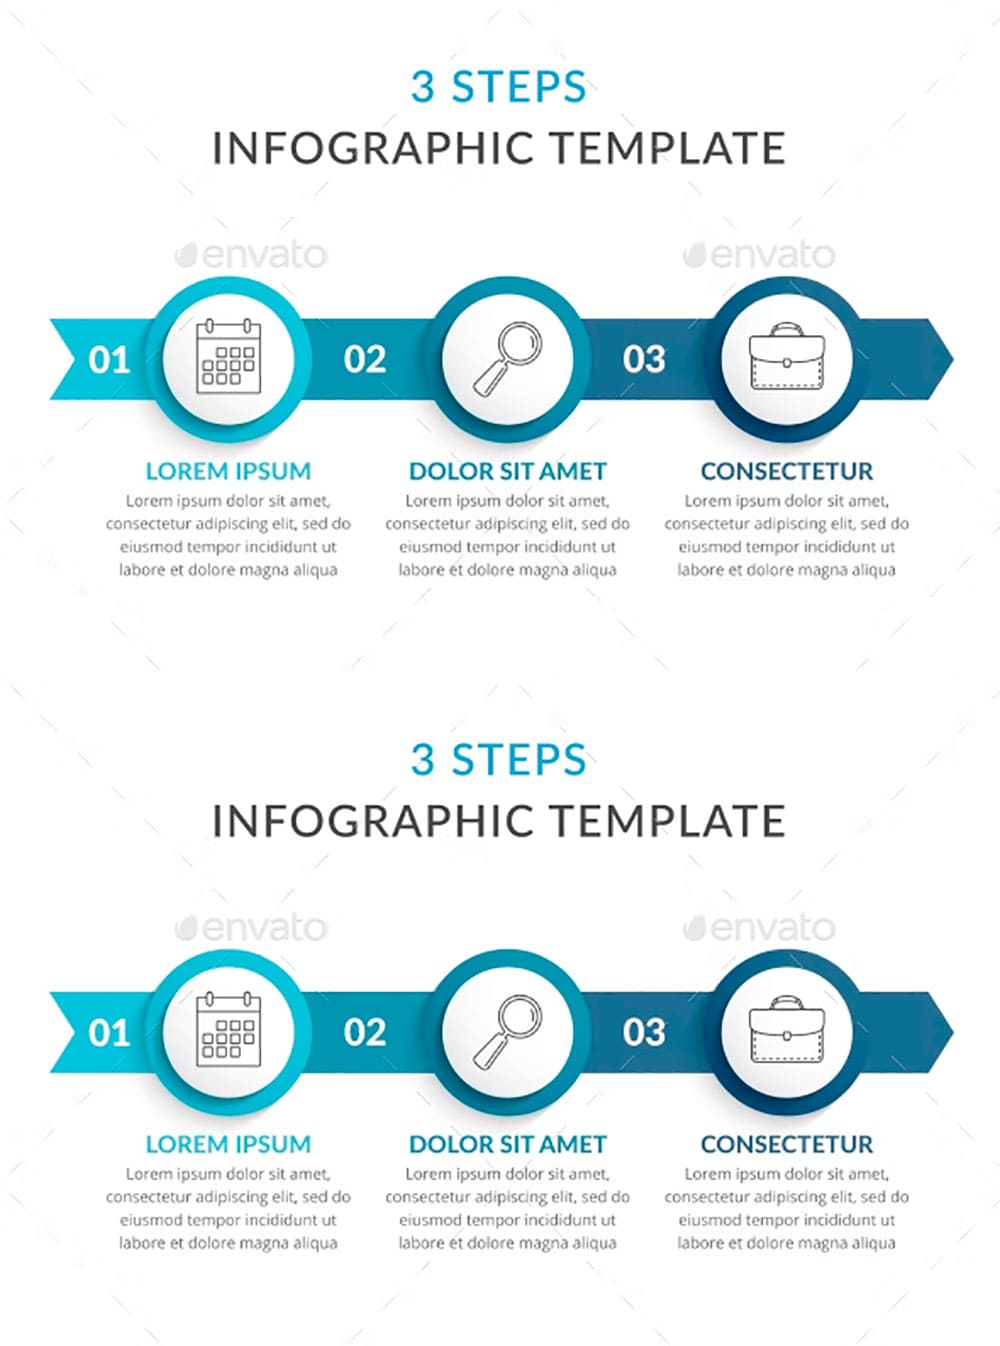 3 steps infographic template, picture for pinterest..